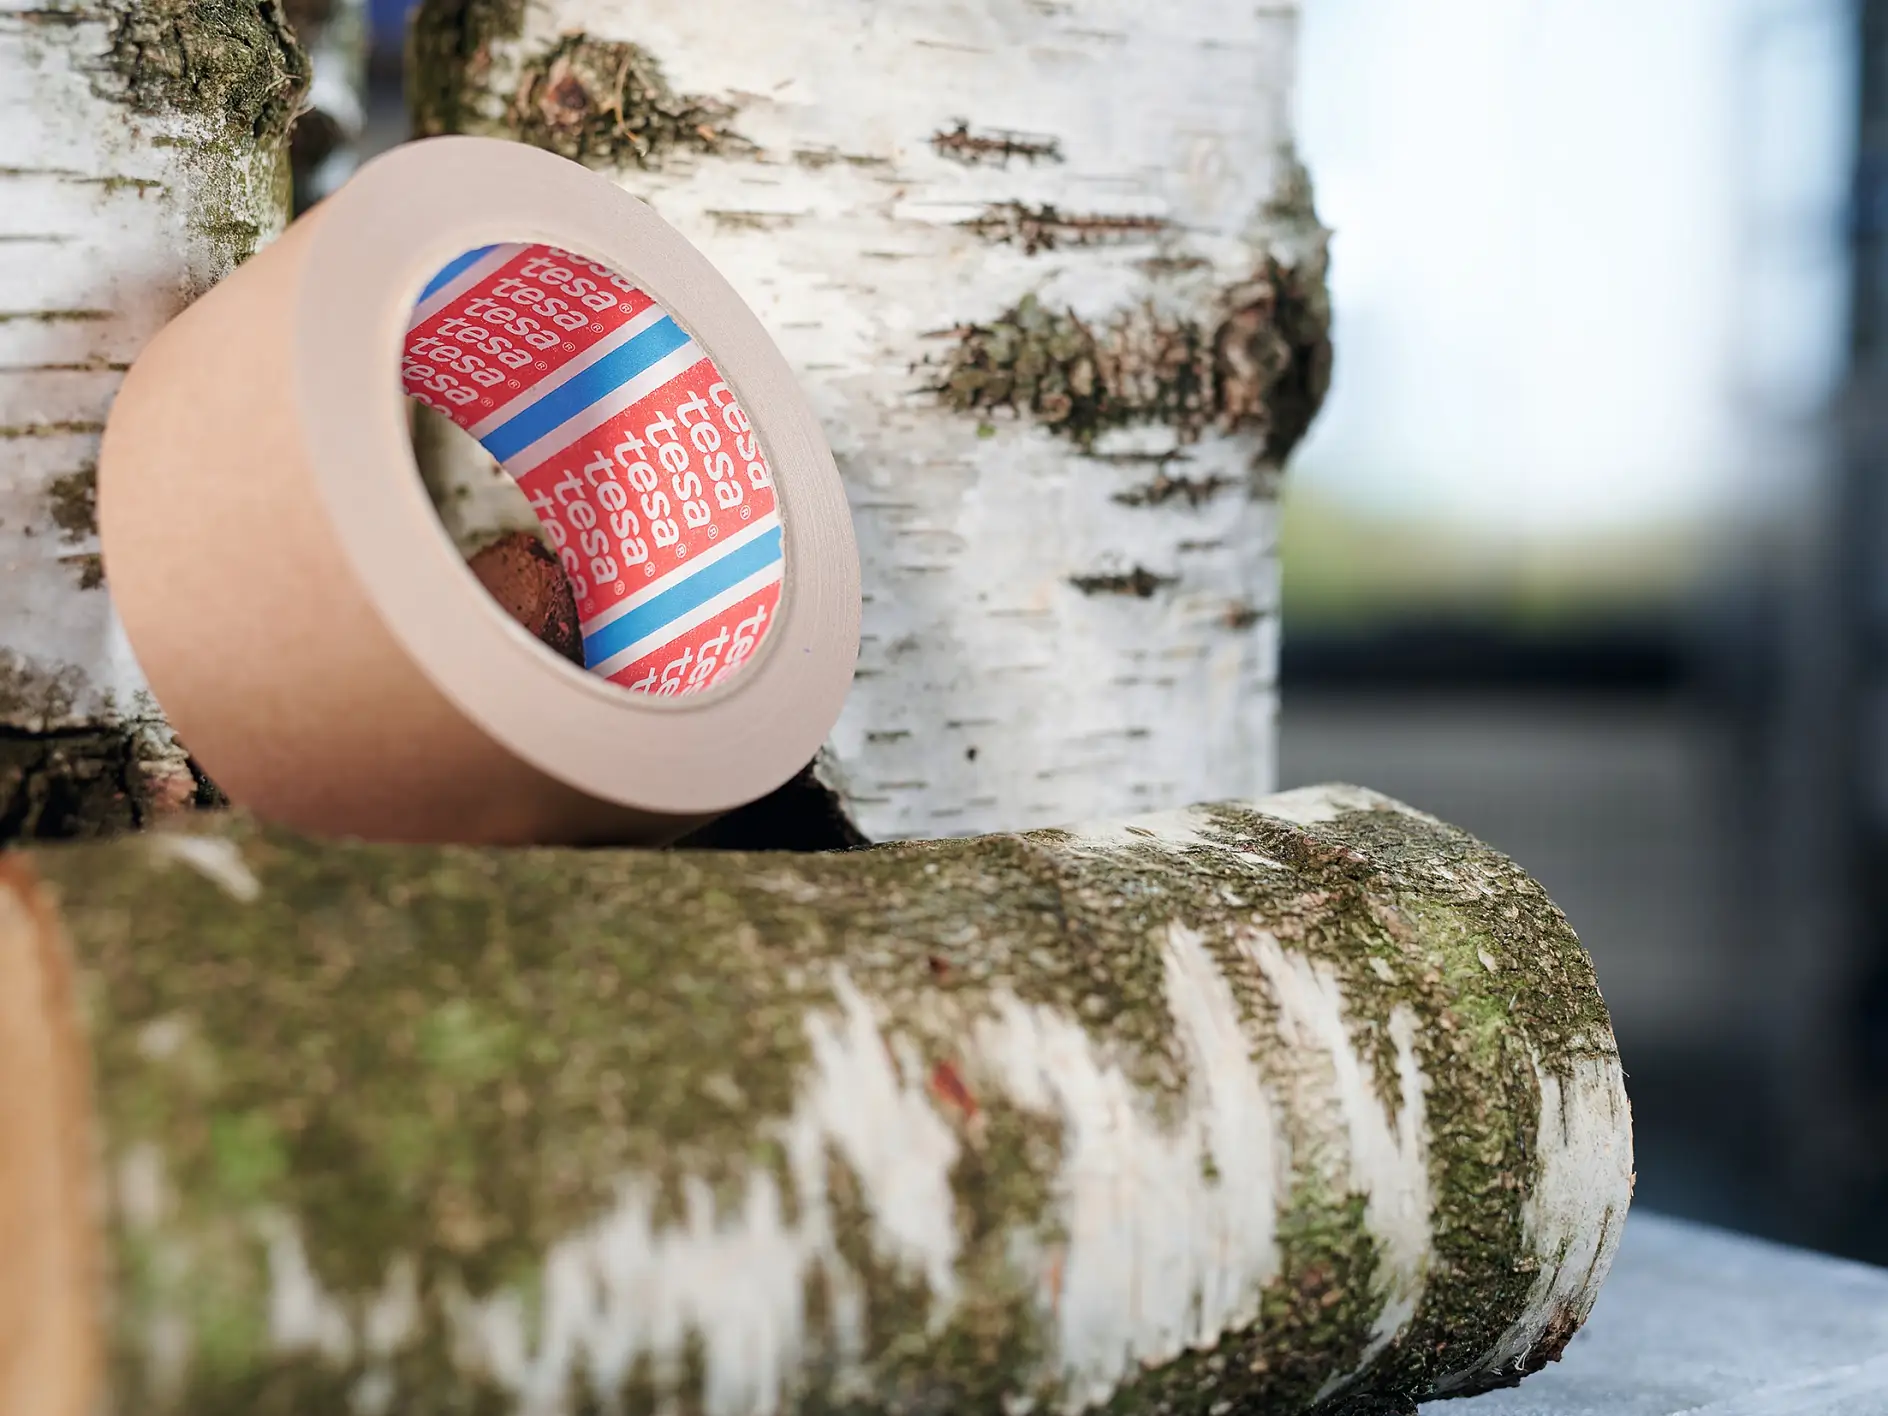 Sustainable packaging tapes can simply be recycled together with other cardboard packaging. A good example is the new tesa paper tape based on a natural rubber adhesive with FSC certification.